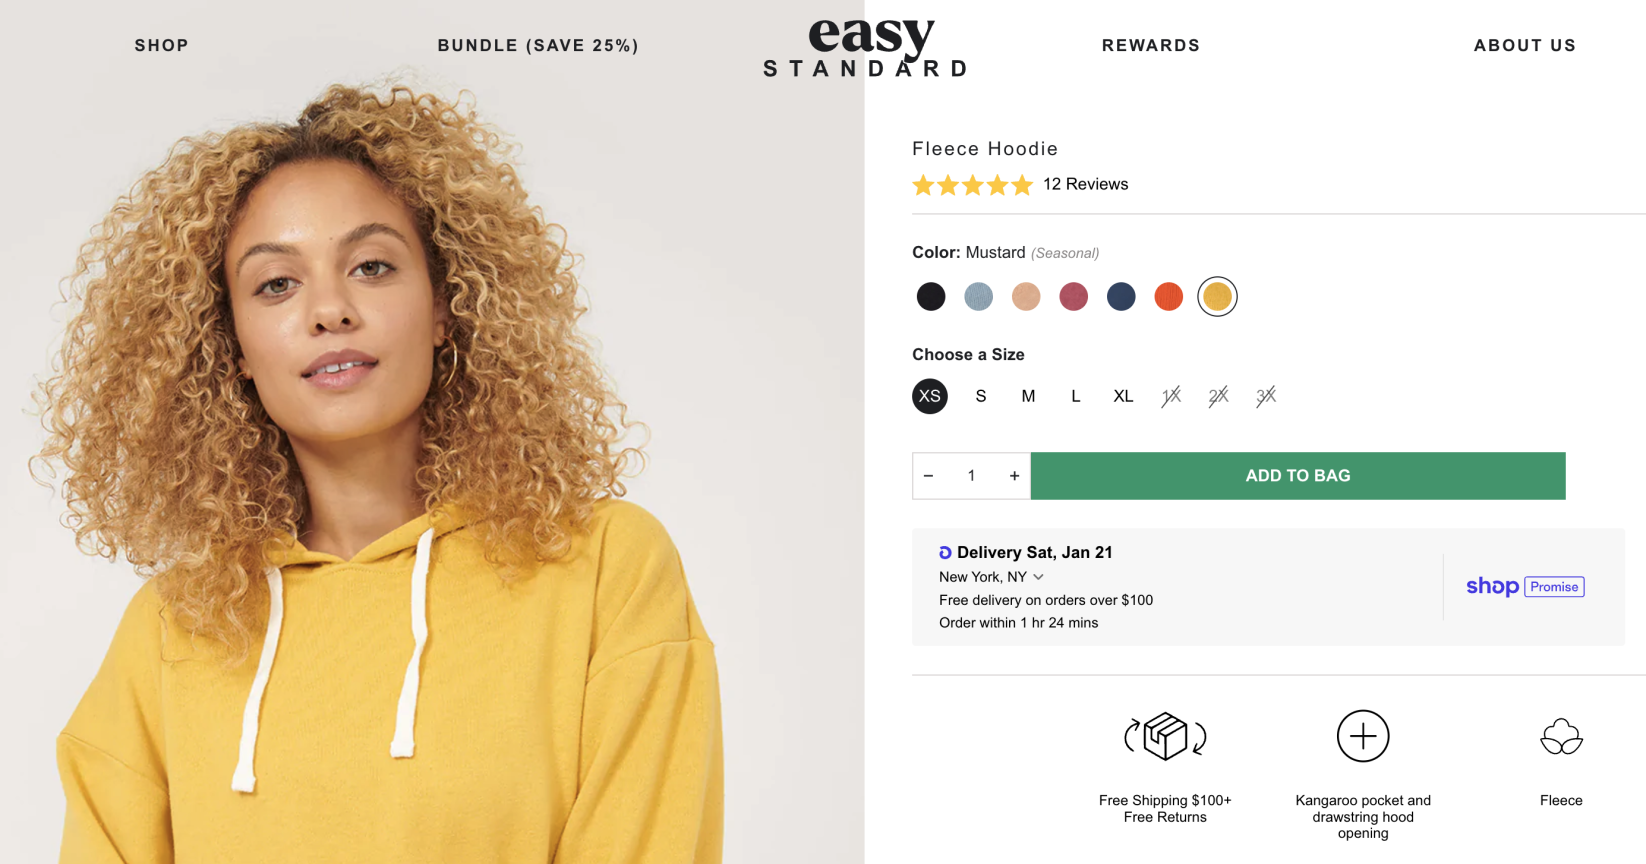 An EasyStandard product listing with a Shop Promise badge